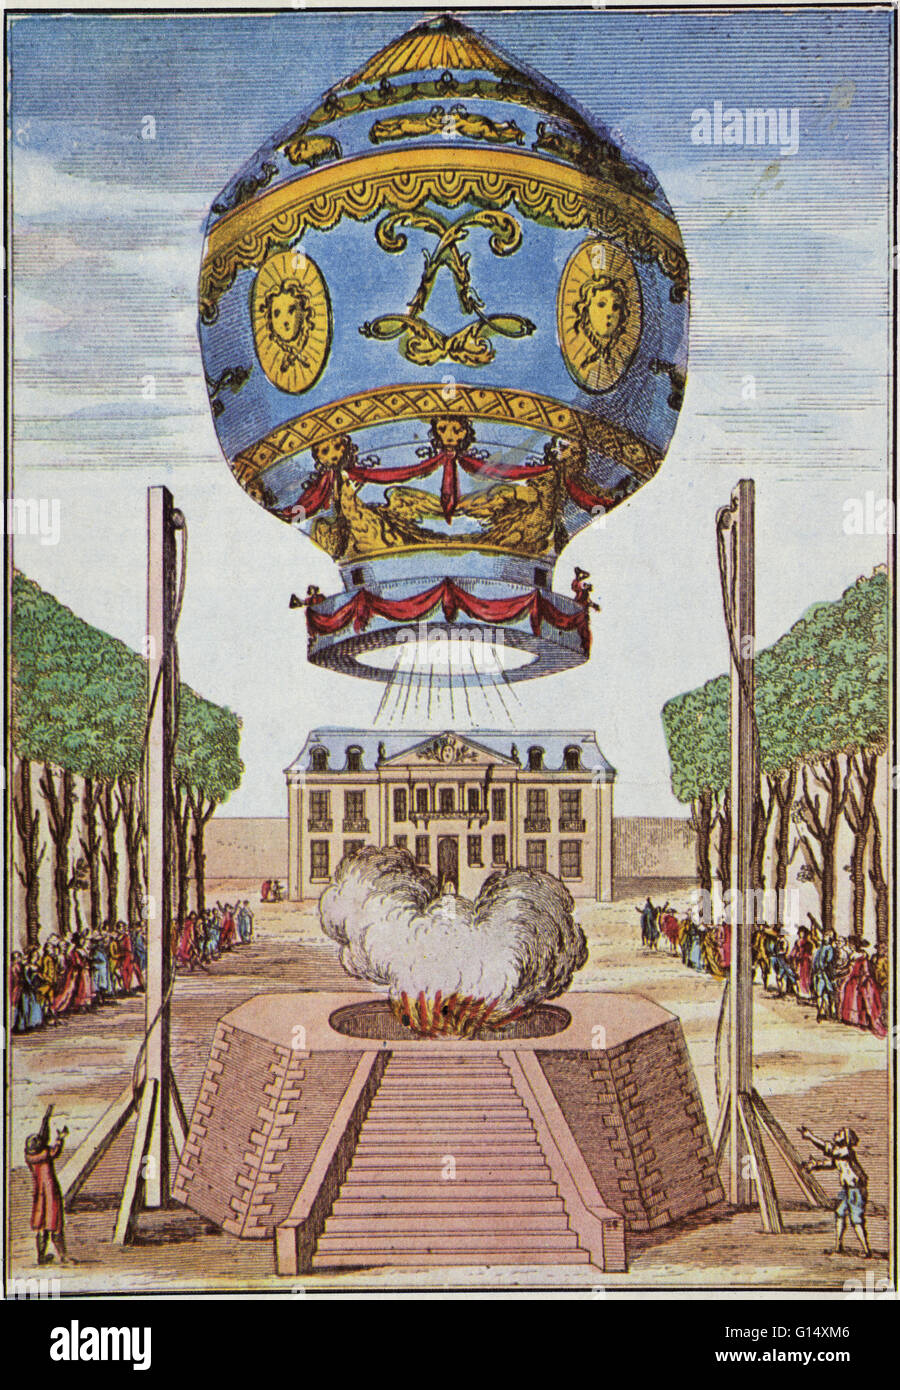 Joseph-Michel Montgolfier (August 26, 1740 - June 26, 1810) and Jacques-Étienne Montgolfier (January 6, 1745 - August 2, 1799) were the inventors of the Montgolfière-style hot air balloon, globe aérostatique. It was Joseph who first contemplated building Stock Photo